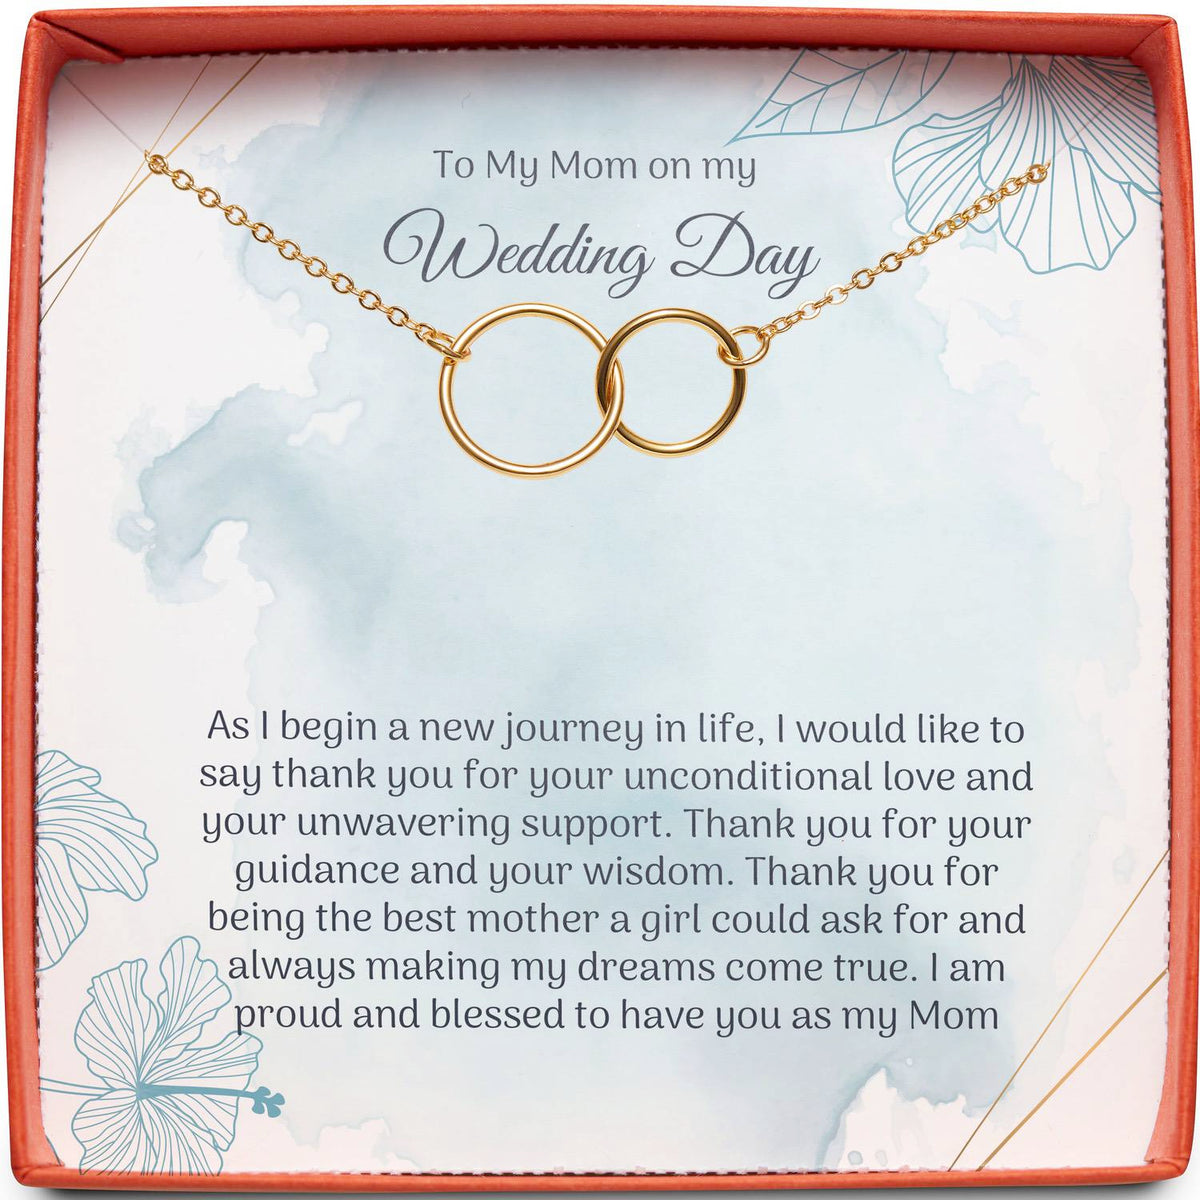 To My Mom on my Wedding Day (From Daughter) | Unwavering Support | Interlocking Circles